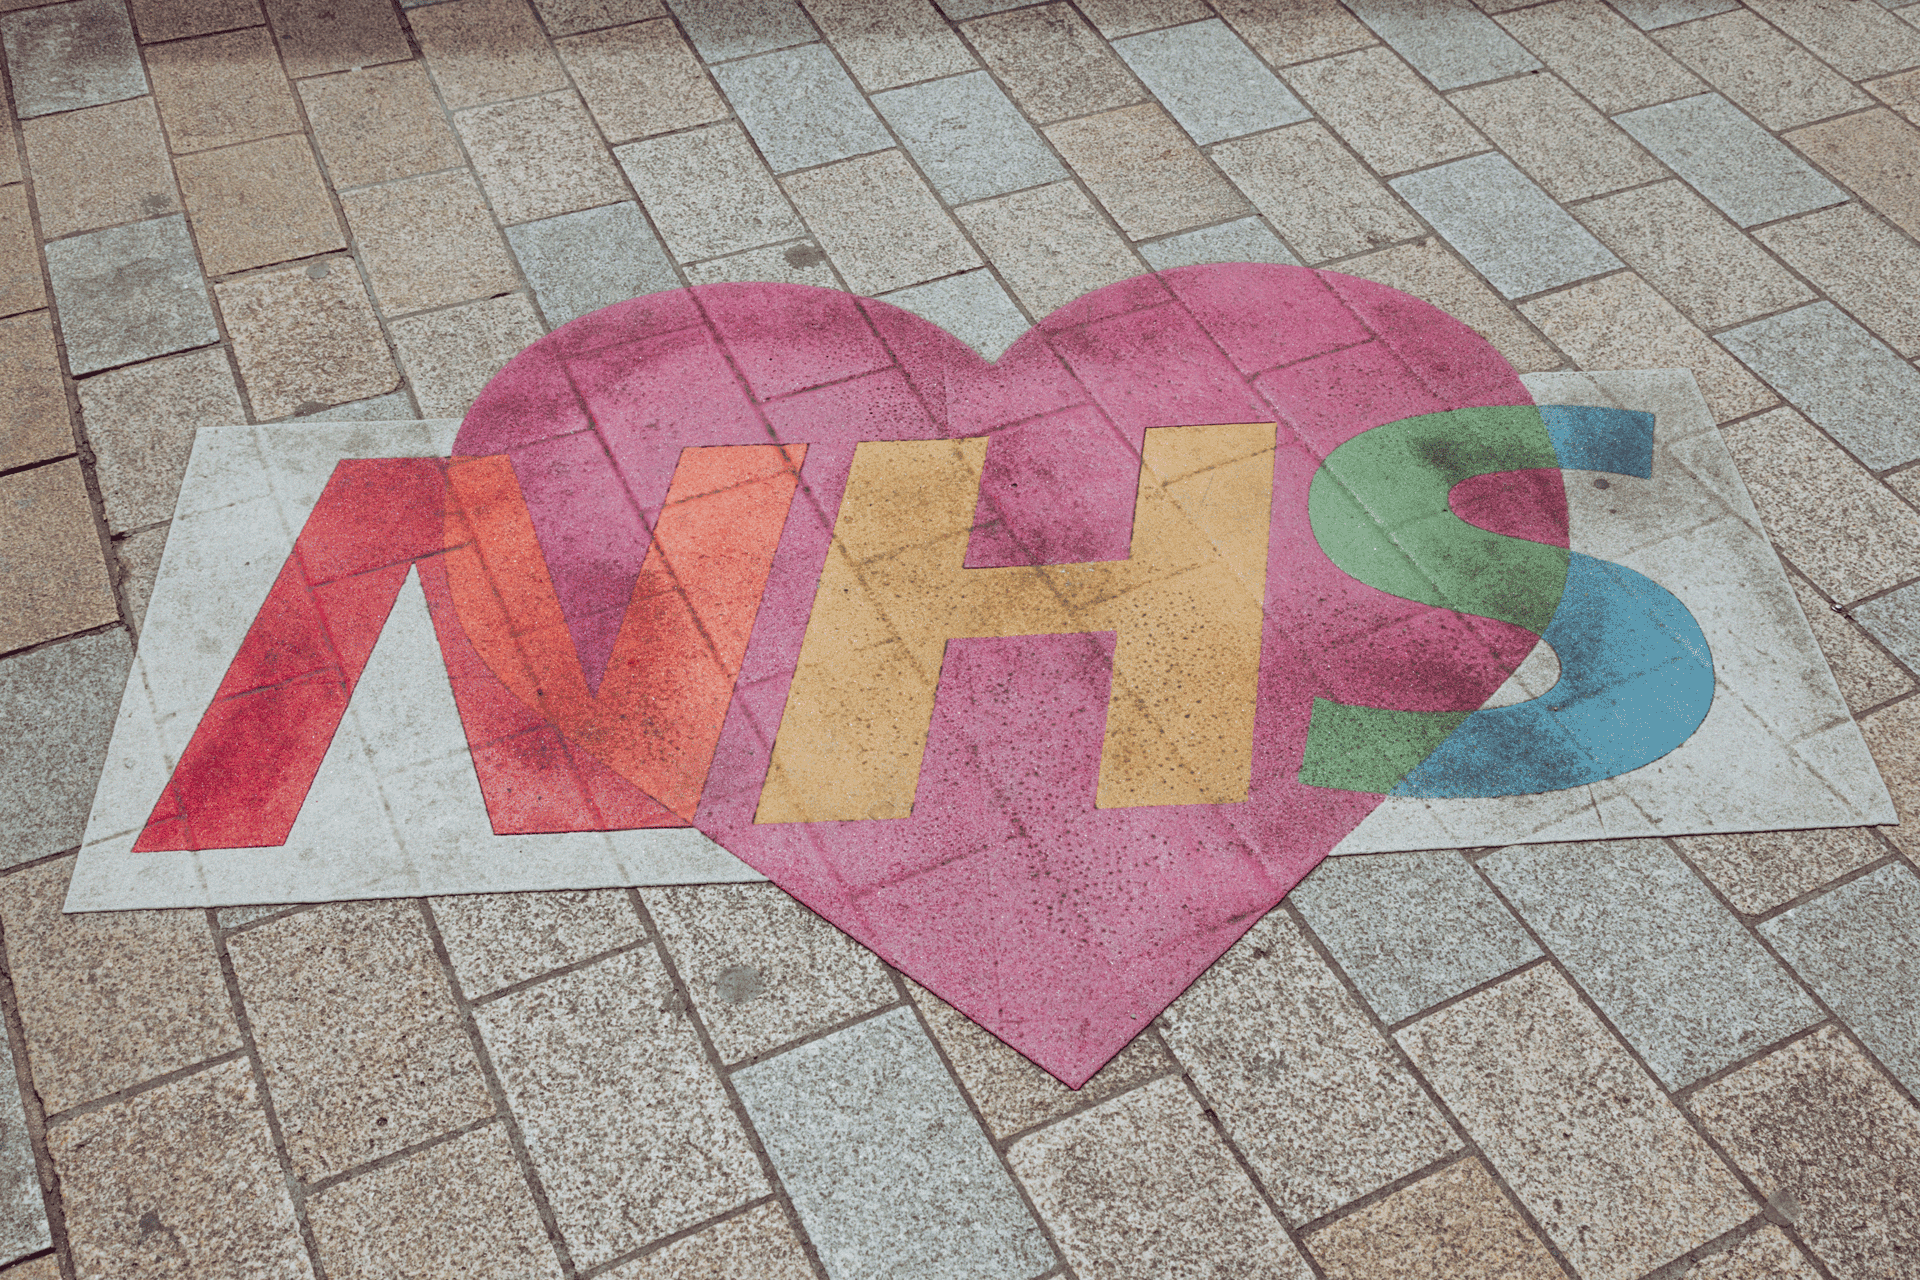 'NHS' written in colourful chalk on the ground.